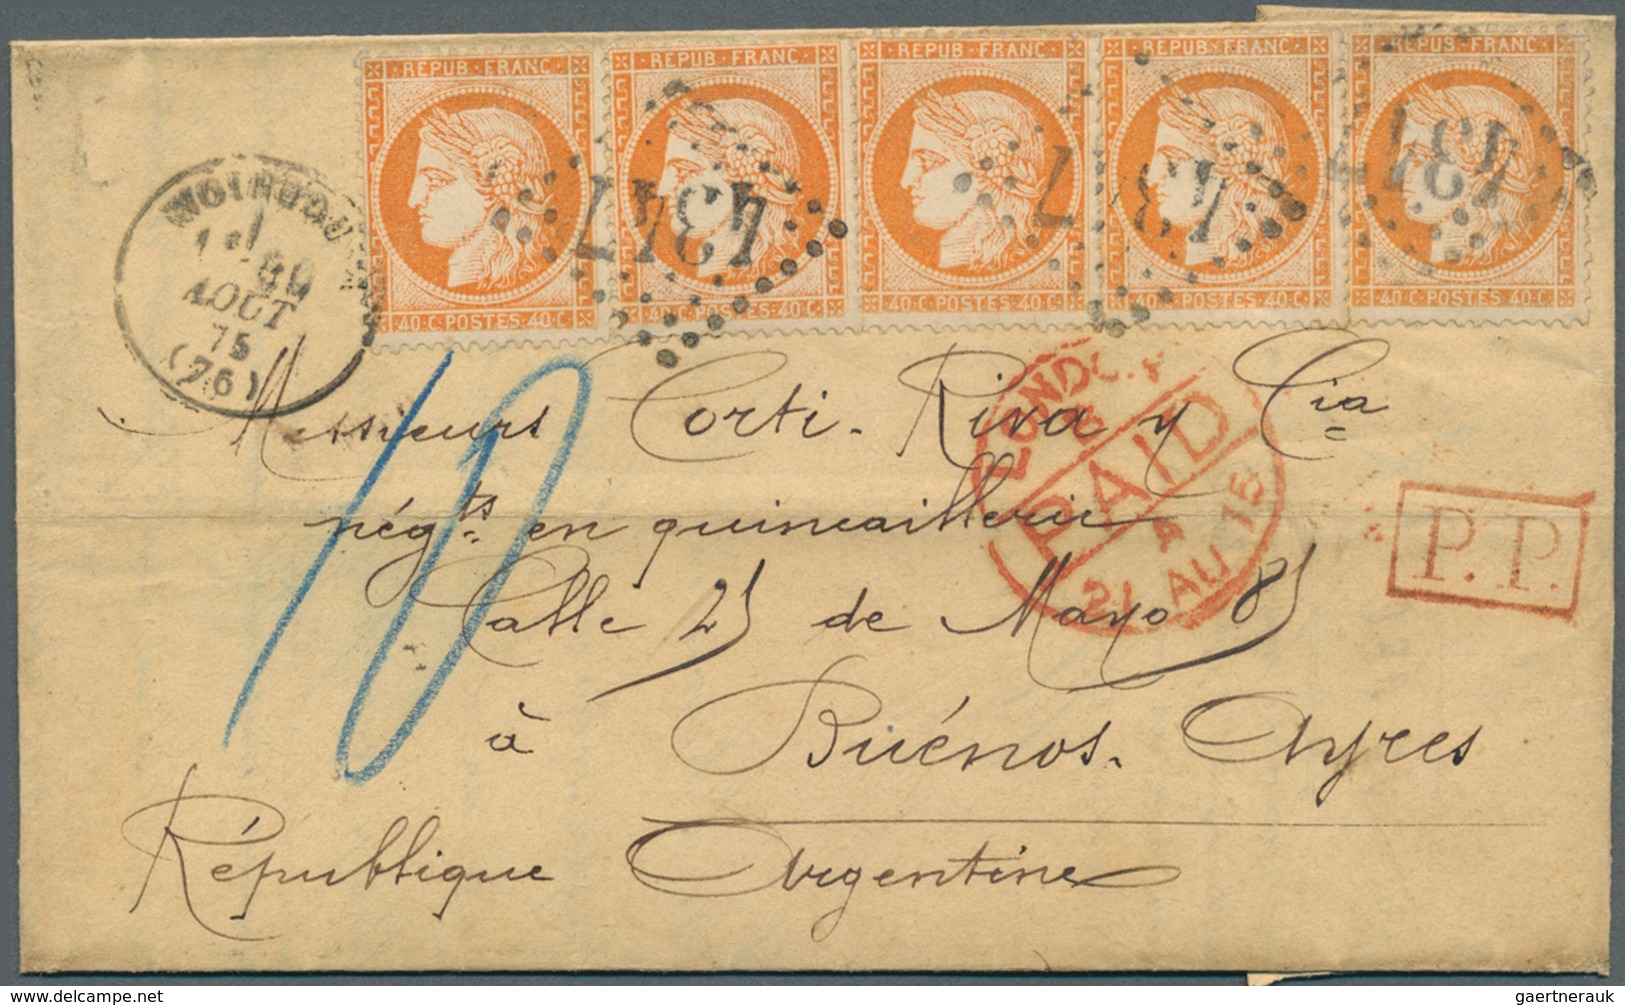 26398 Frankreich: 1865/1872, lot of eight lettersheets with Napoloen and Ceres frankings to Brazil/Argenti